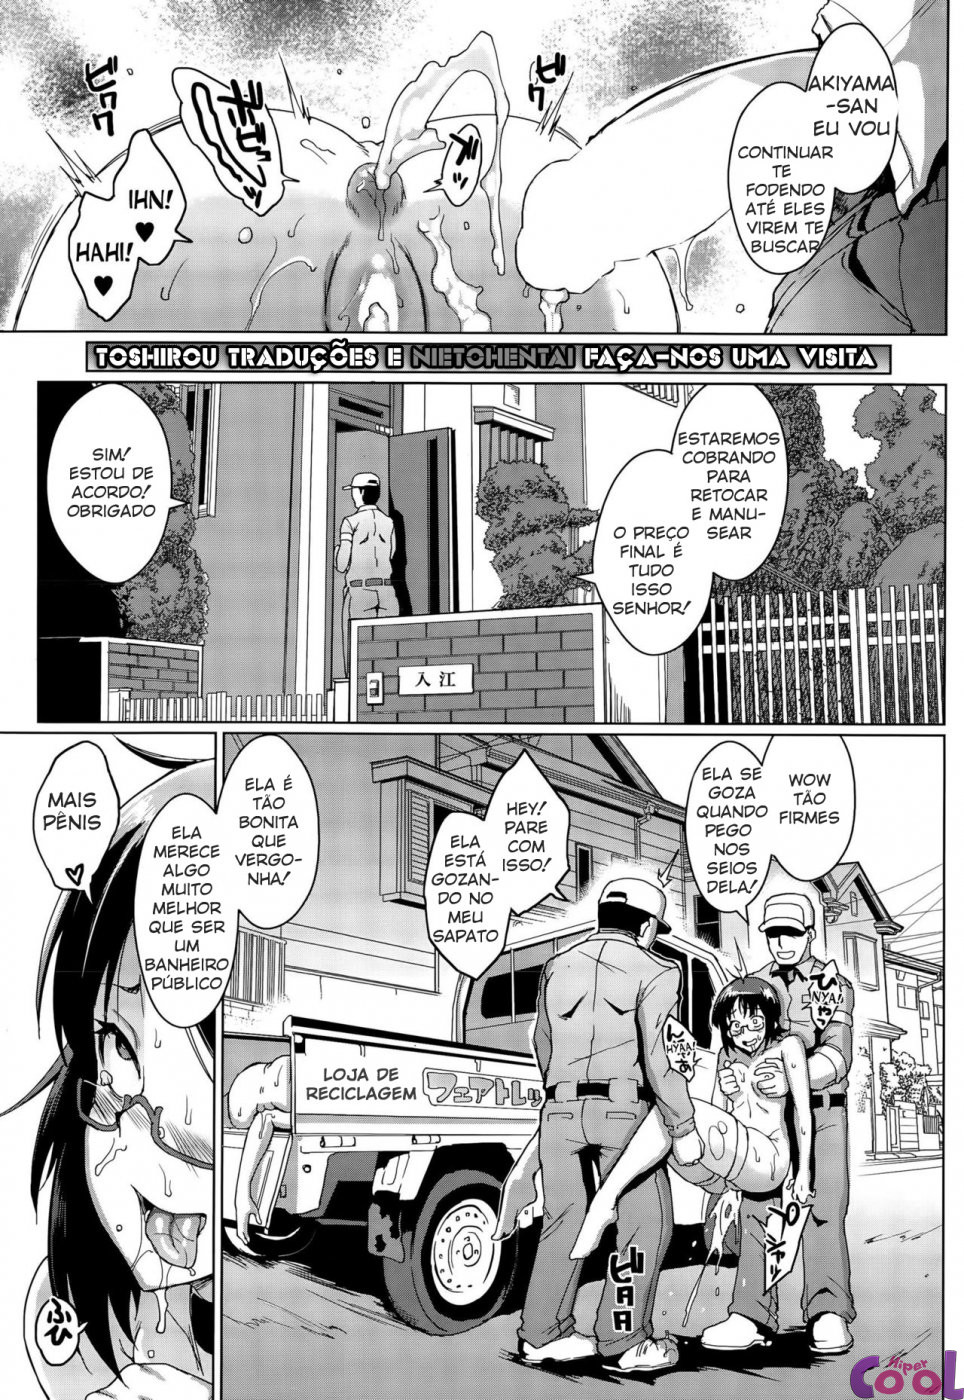 dolls-chapter-02-page-25.jpg